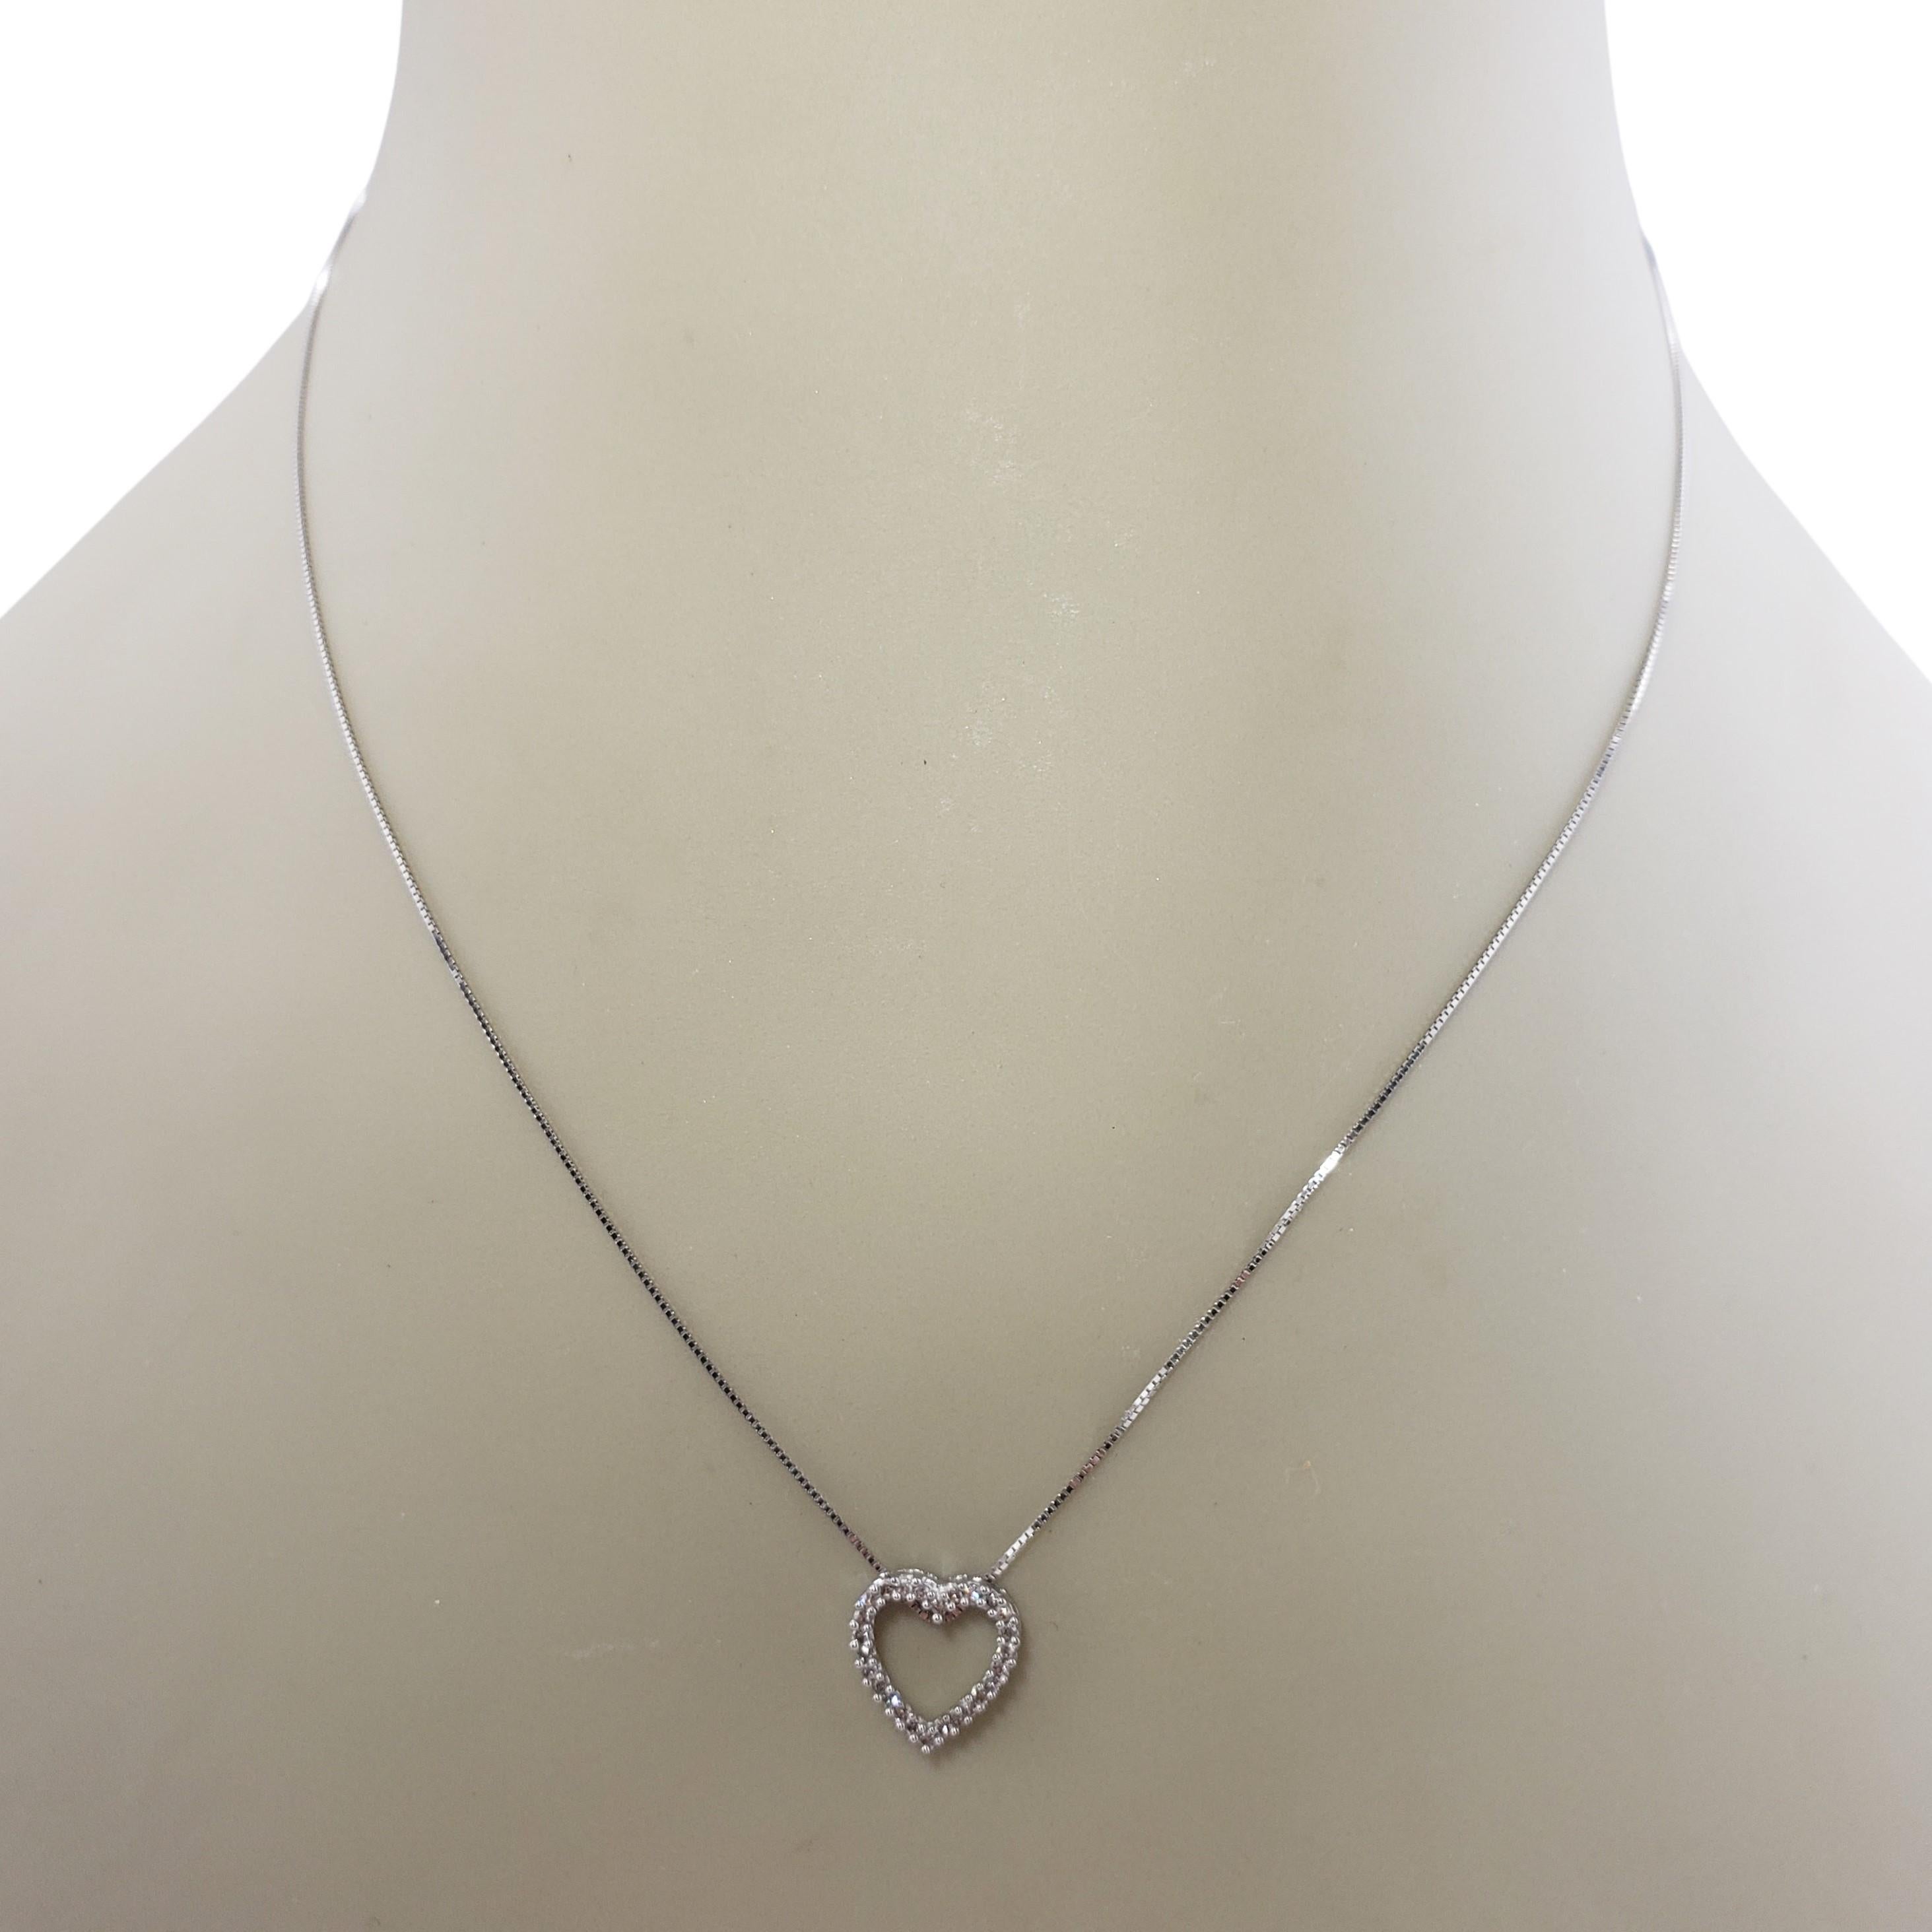 heart necklace with diamond in the middle